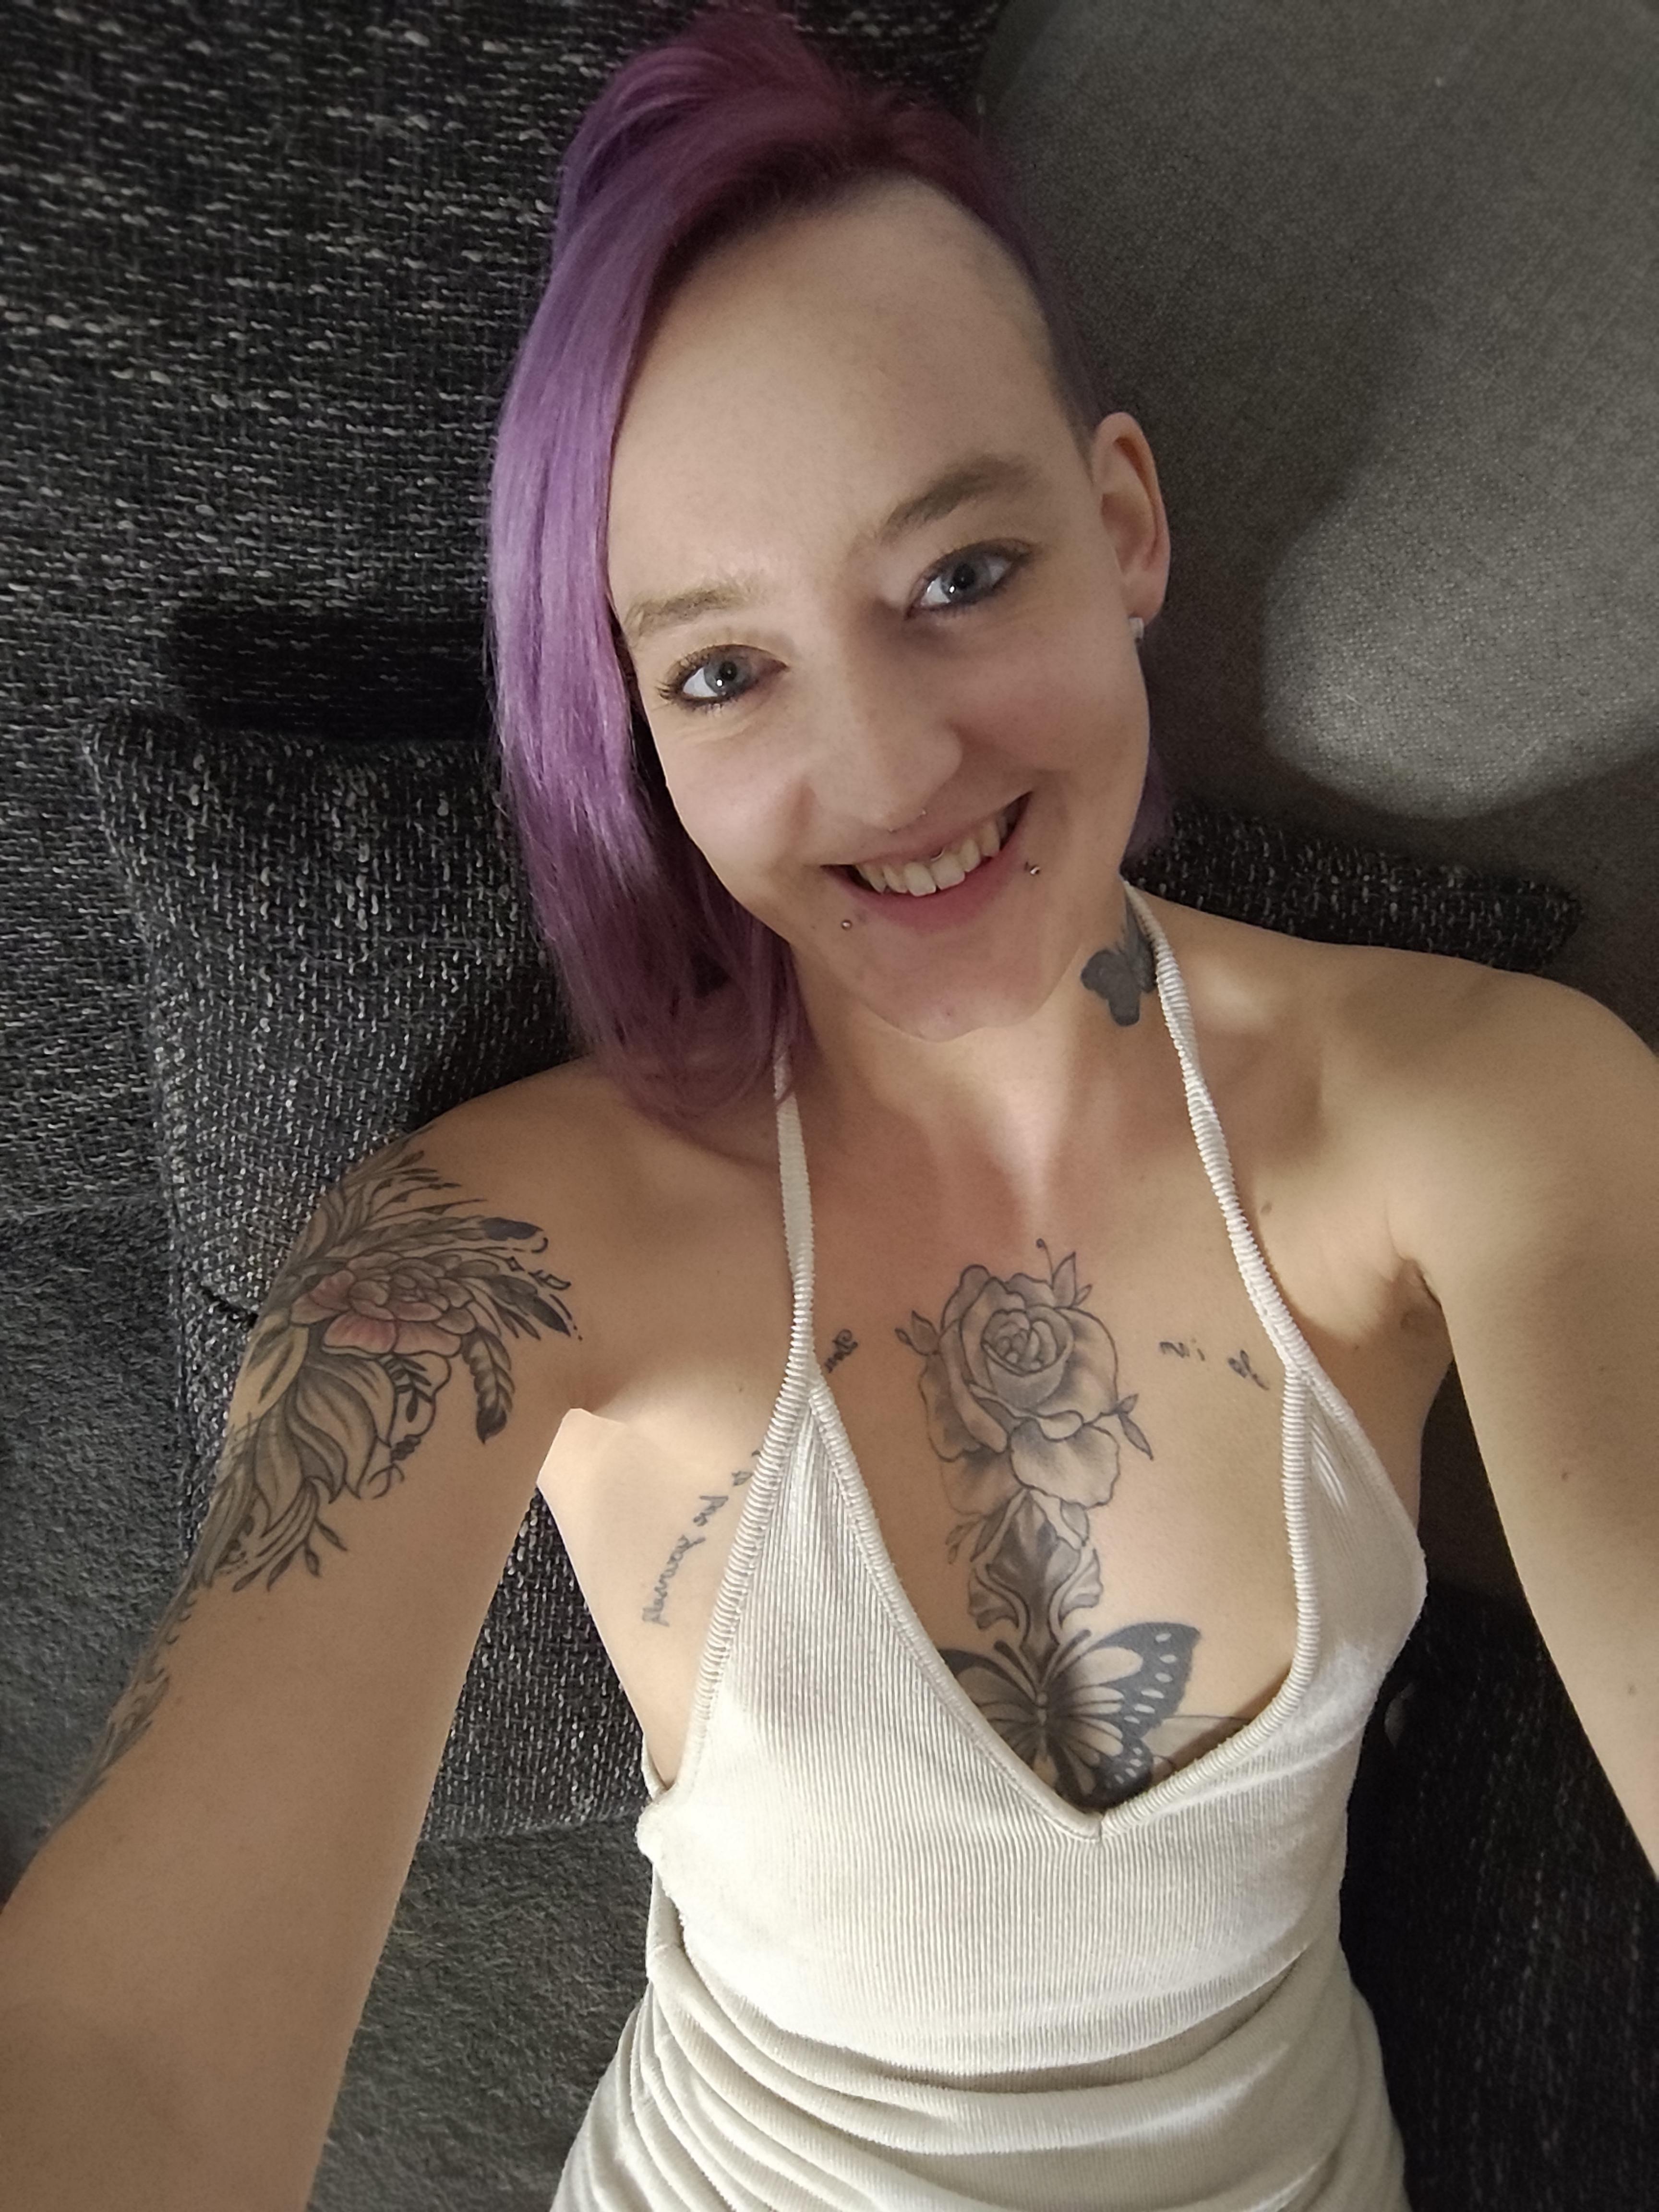 HotLucy28 live cam on Cam4